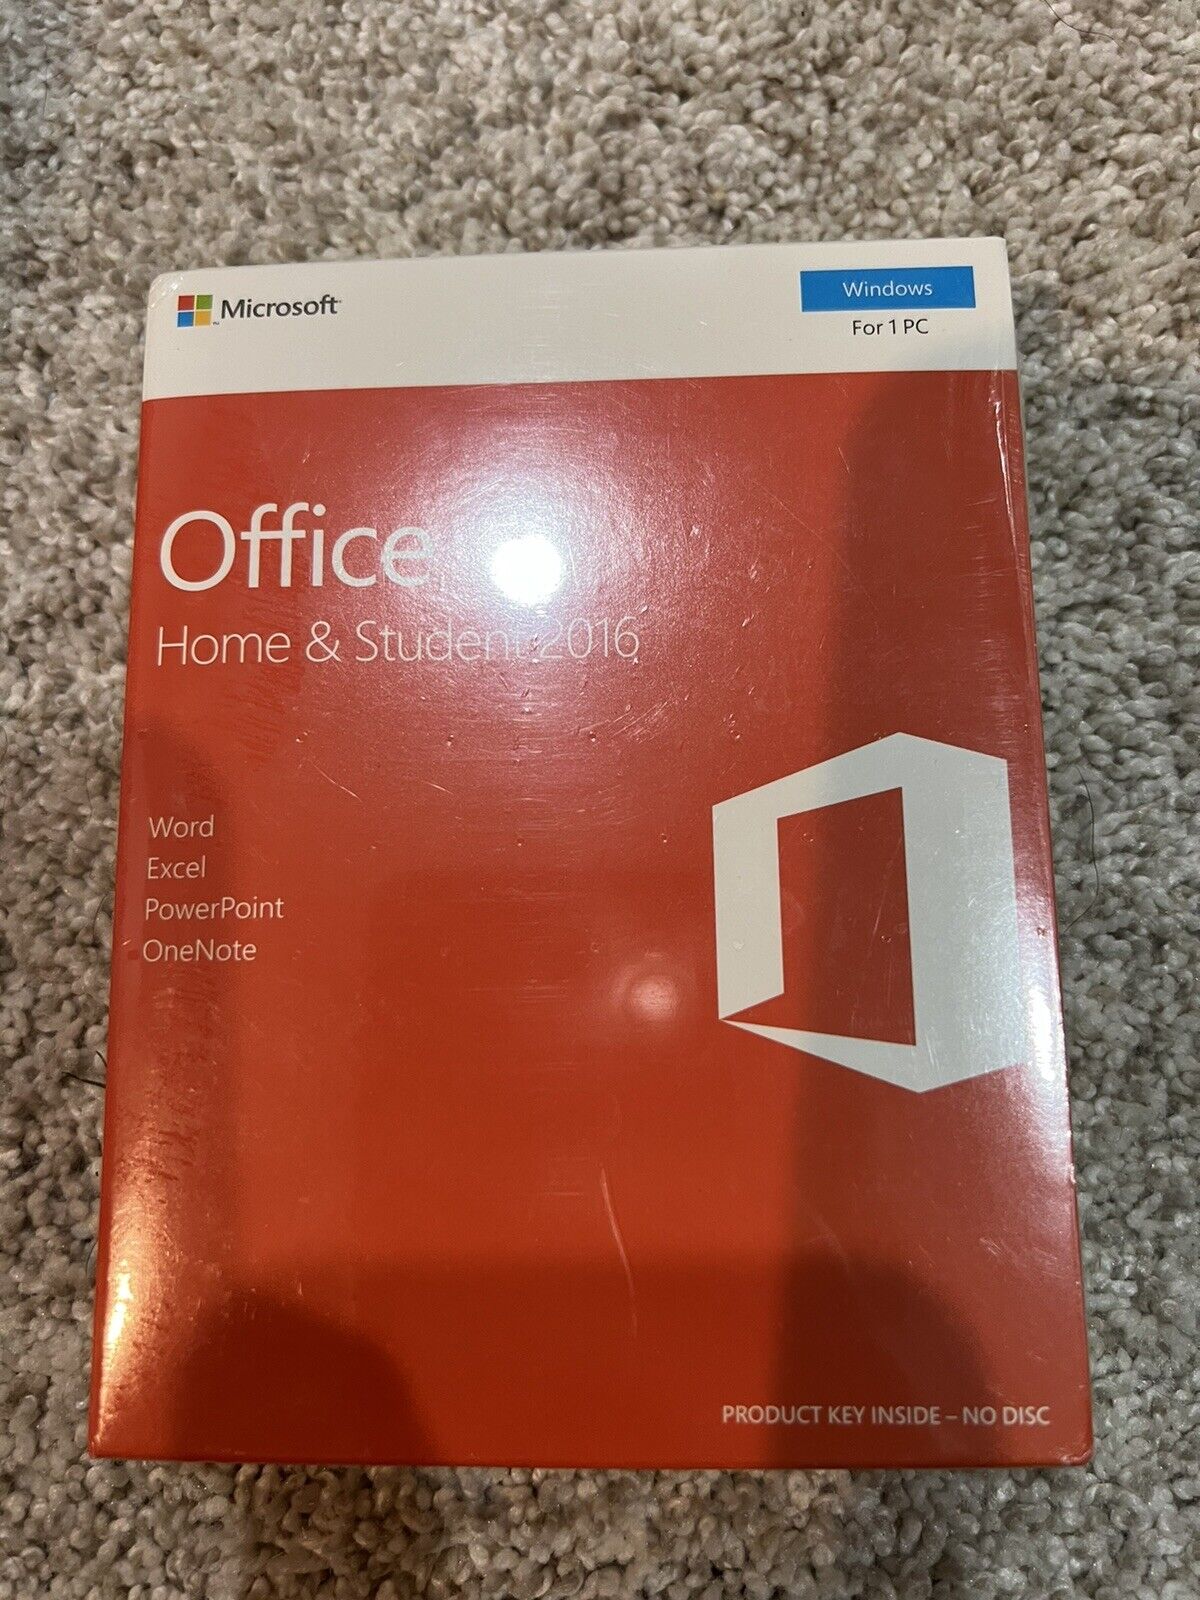 *New* MICROSOFT Office Home and Student 2016 - 1PC